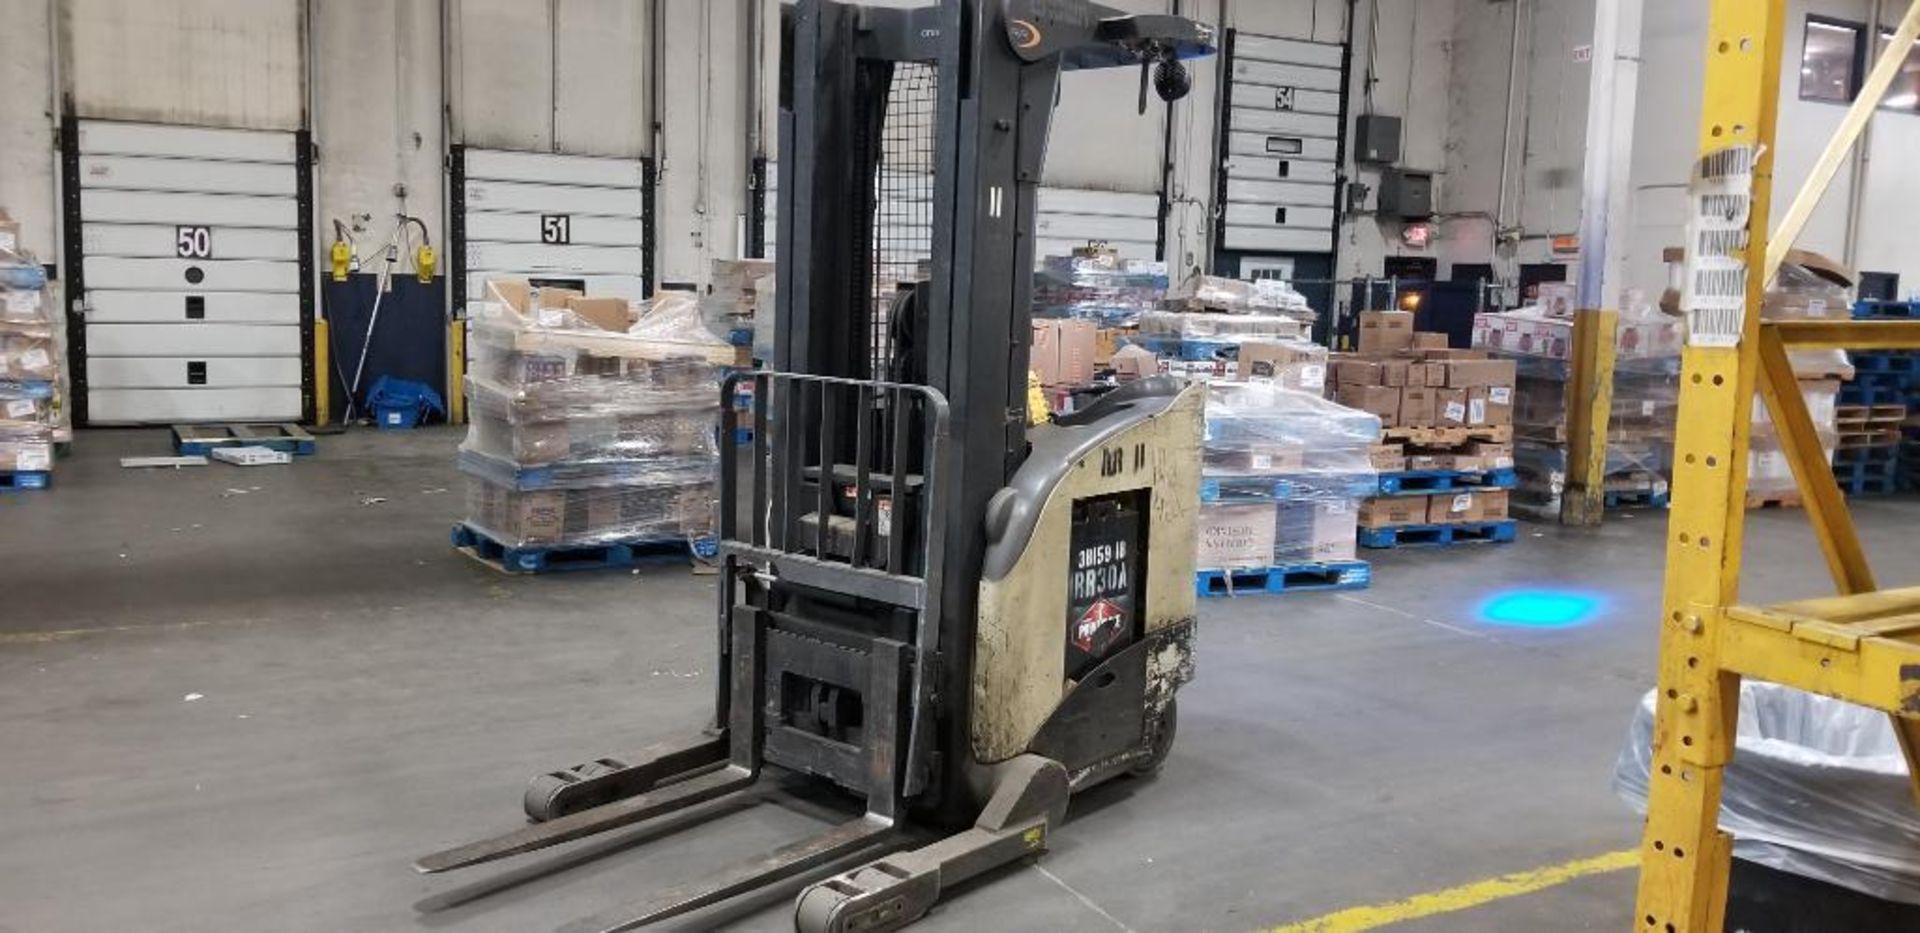 Crown RR 5200 Series Electric Reach Truck, Model RR5220-45, S/N. 1A274892, 4,500 LB. Lift Capacity, - Image 4 of 8